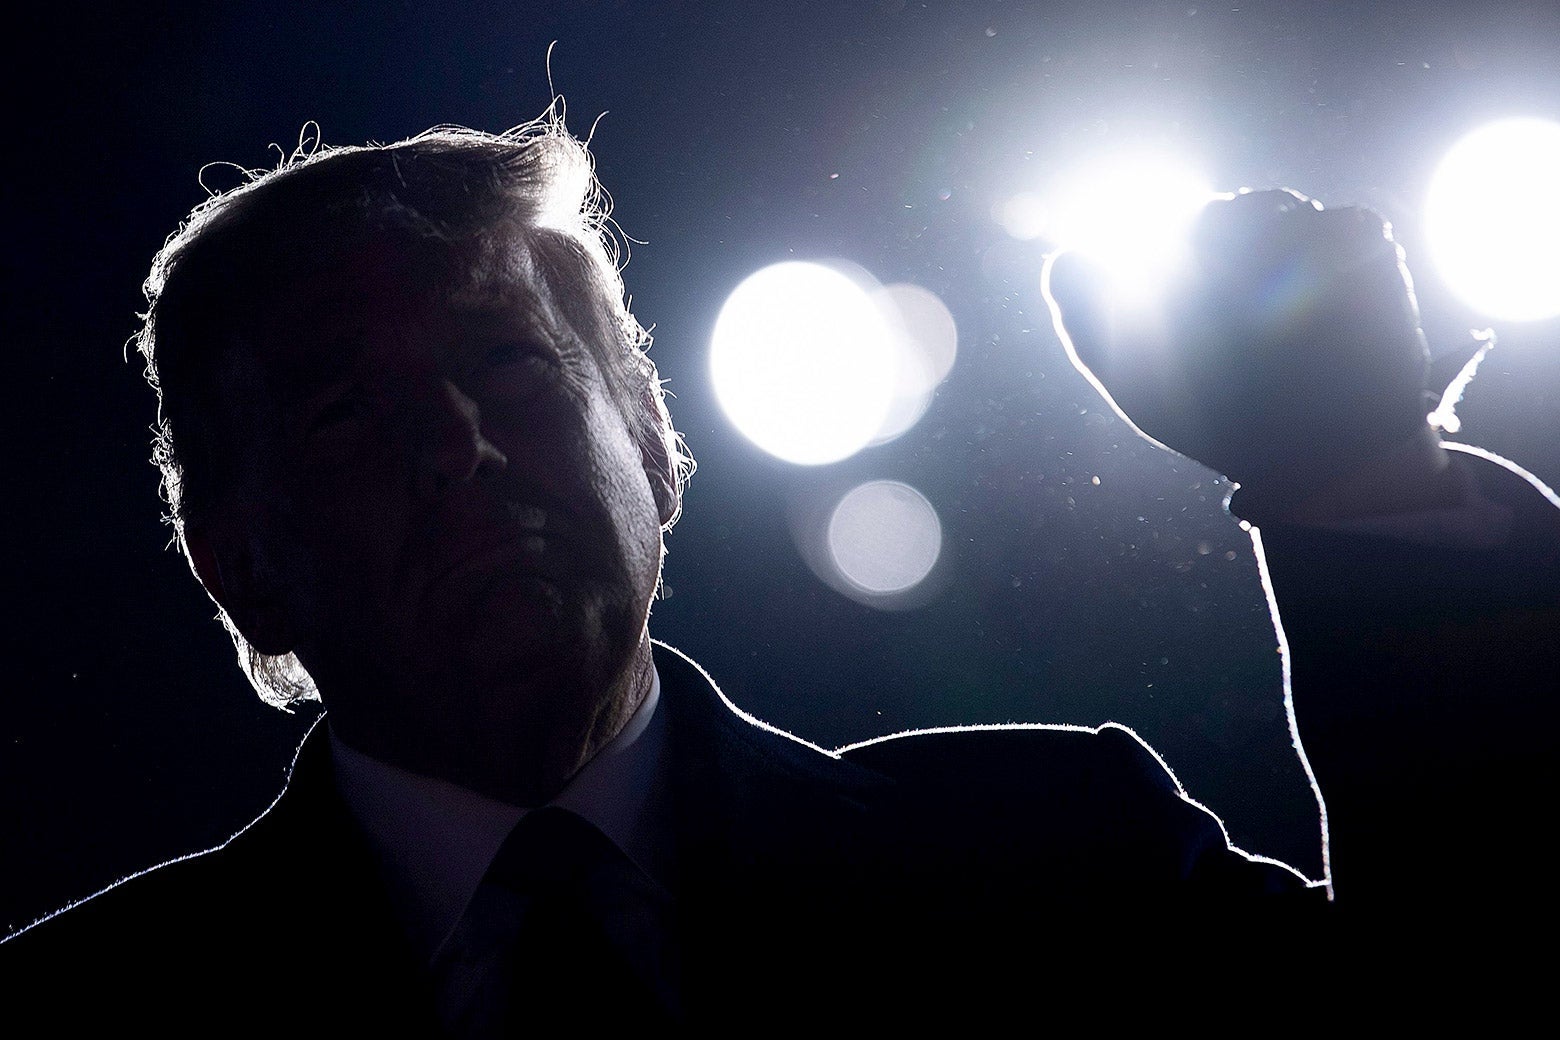 Donald Trump against a dark night sky with large flood lights behind him.